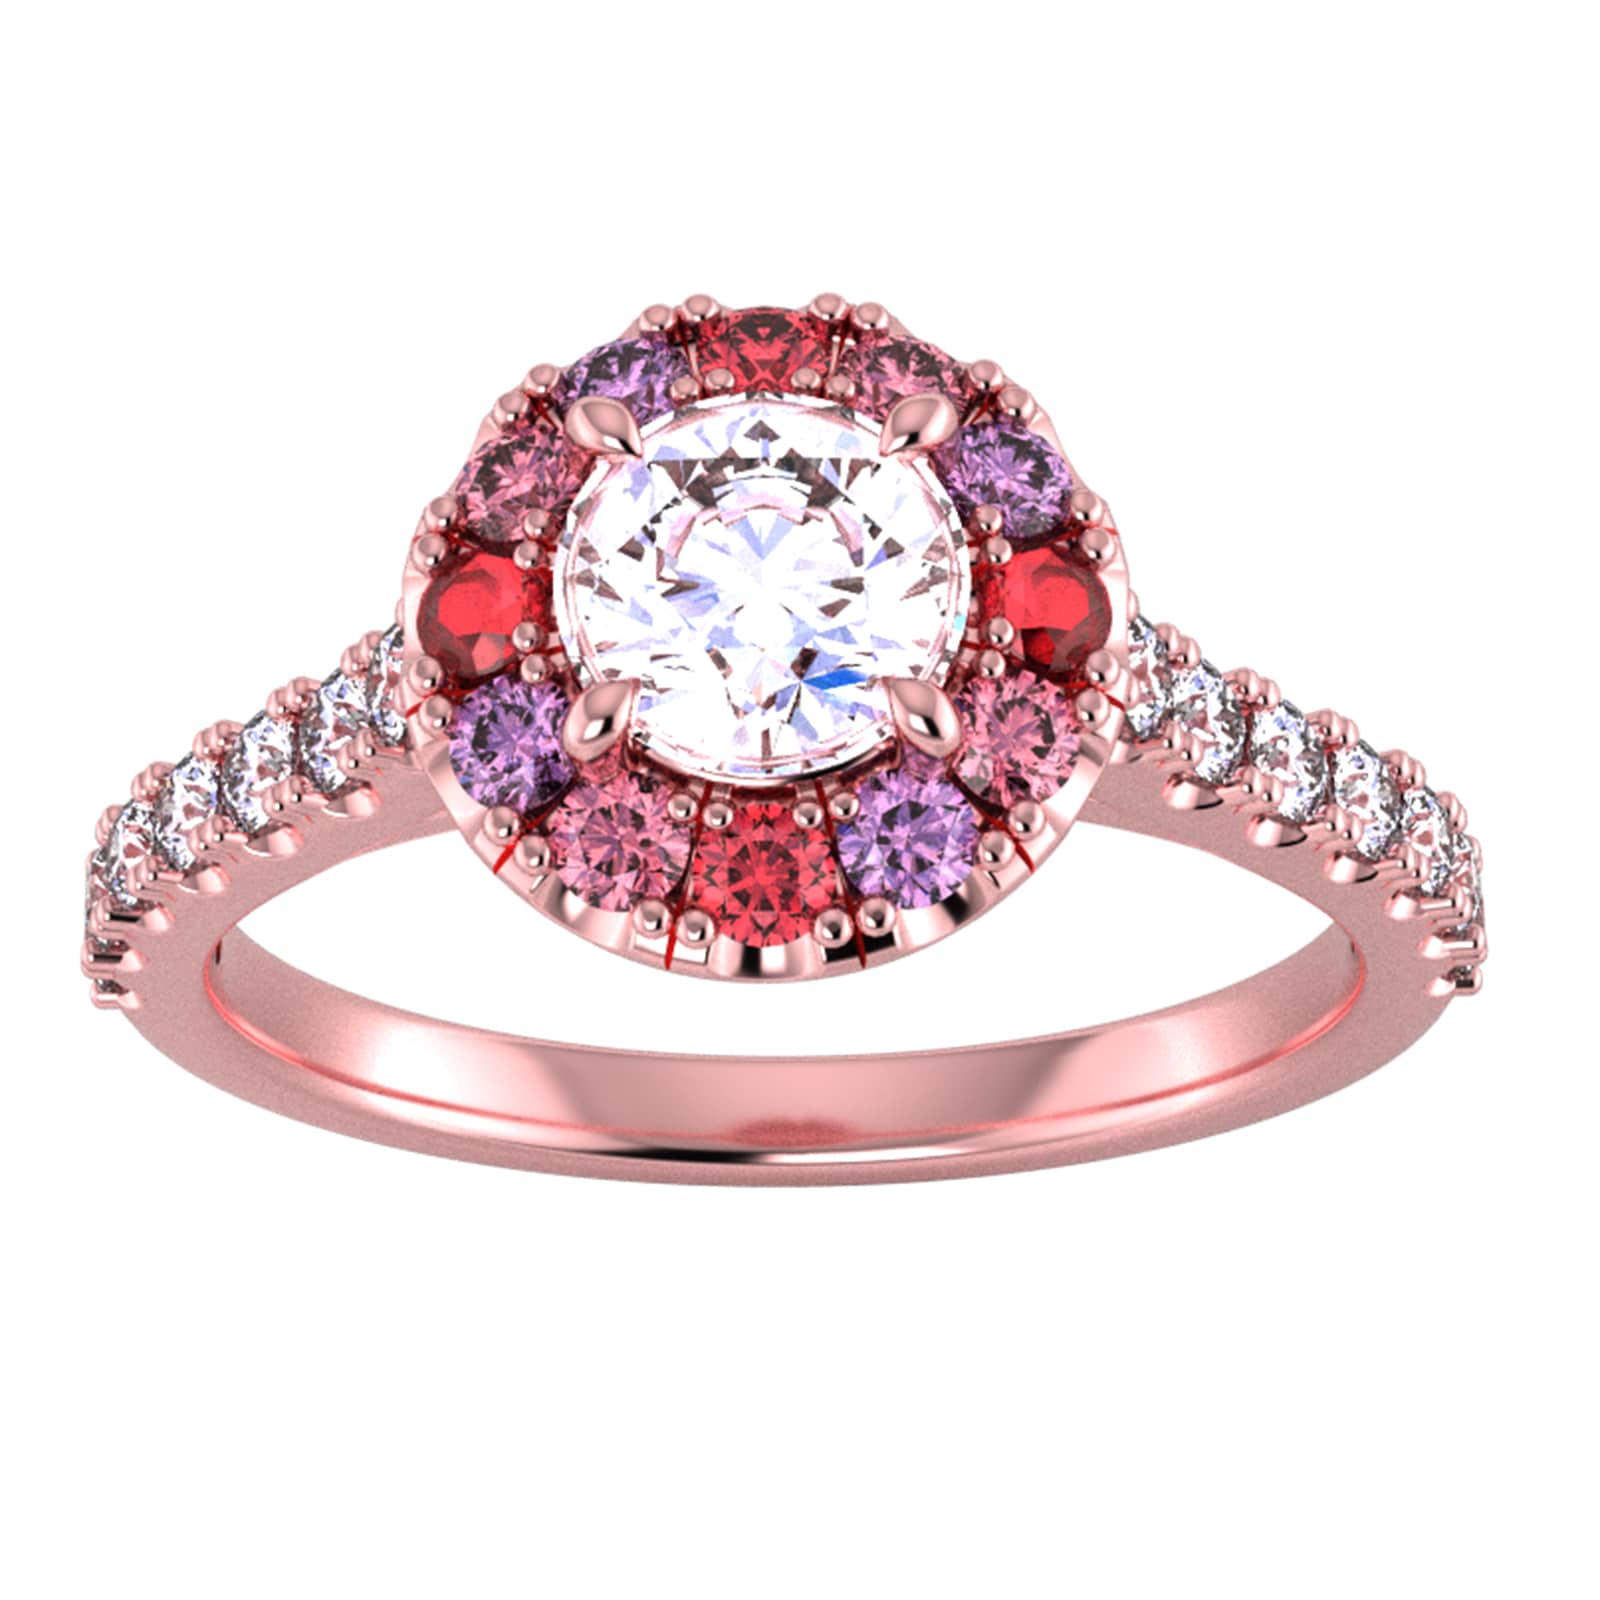 9ct Rose Gold Diamond & Pink, Red, Purple Sapphire Halo Ring - Ring Size W